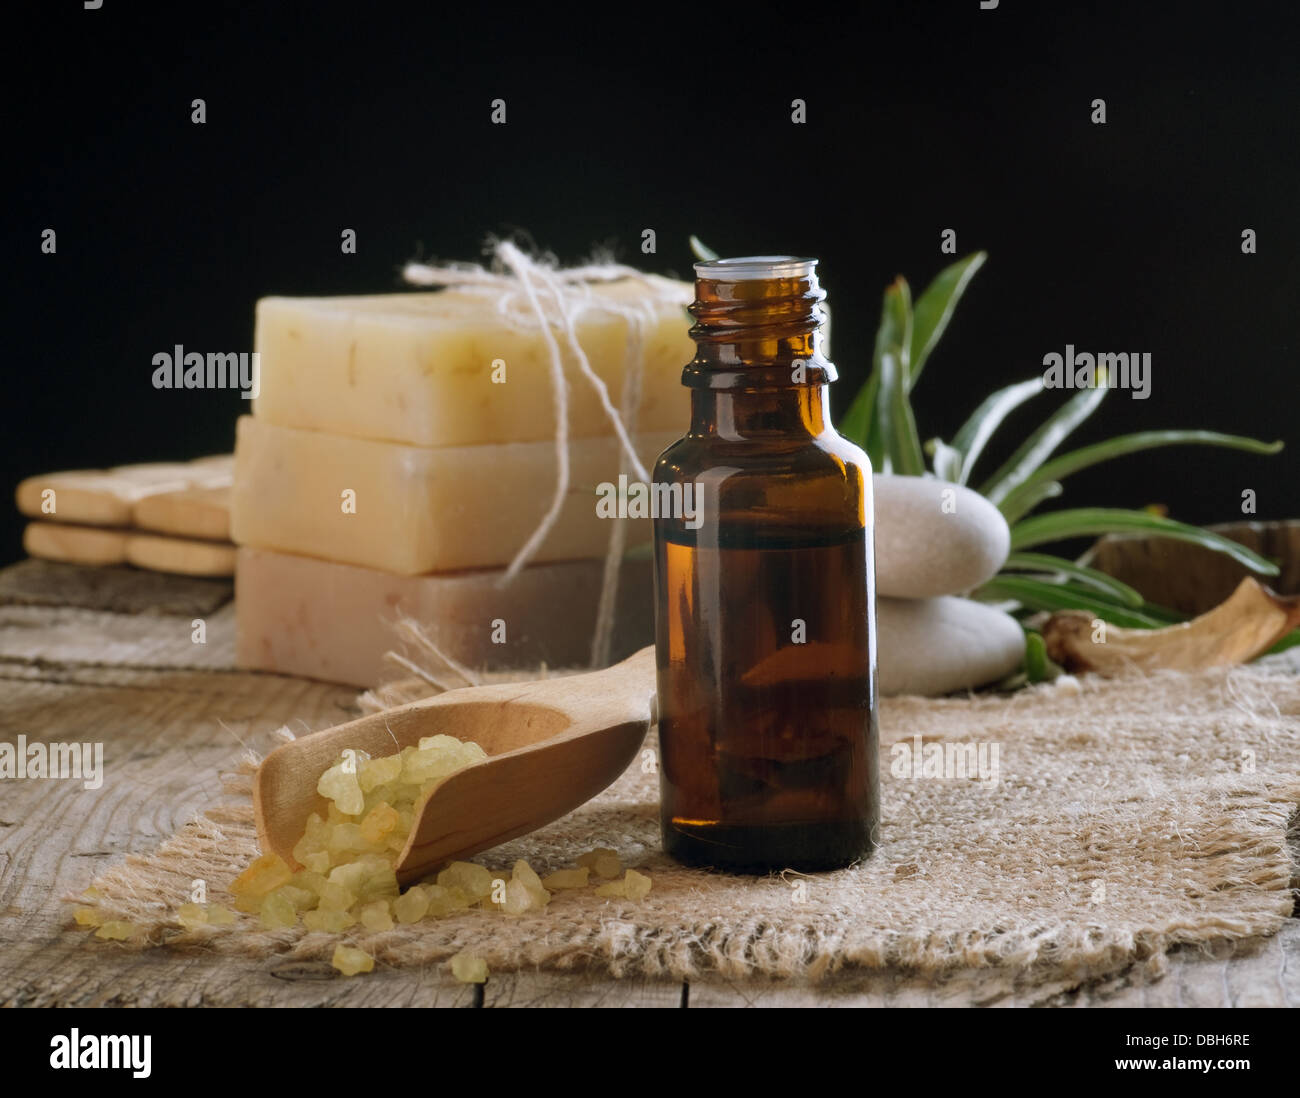 Spa Treatment. Essential Oil. Isolated On Black Stock Photo